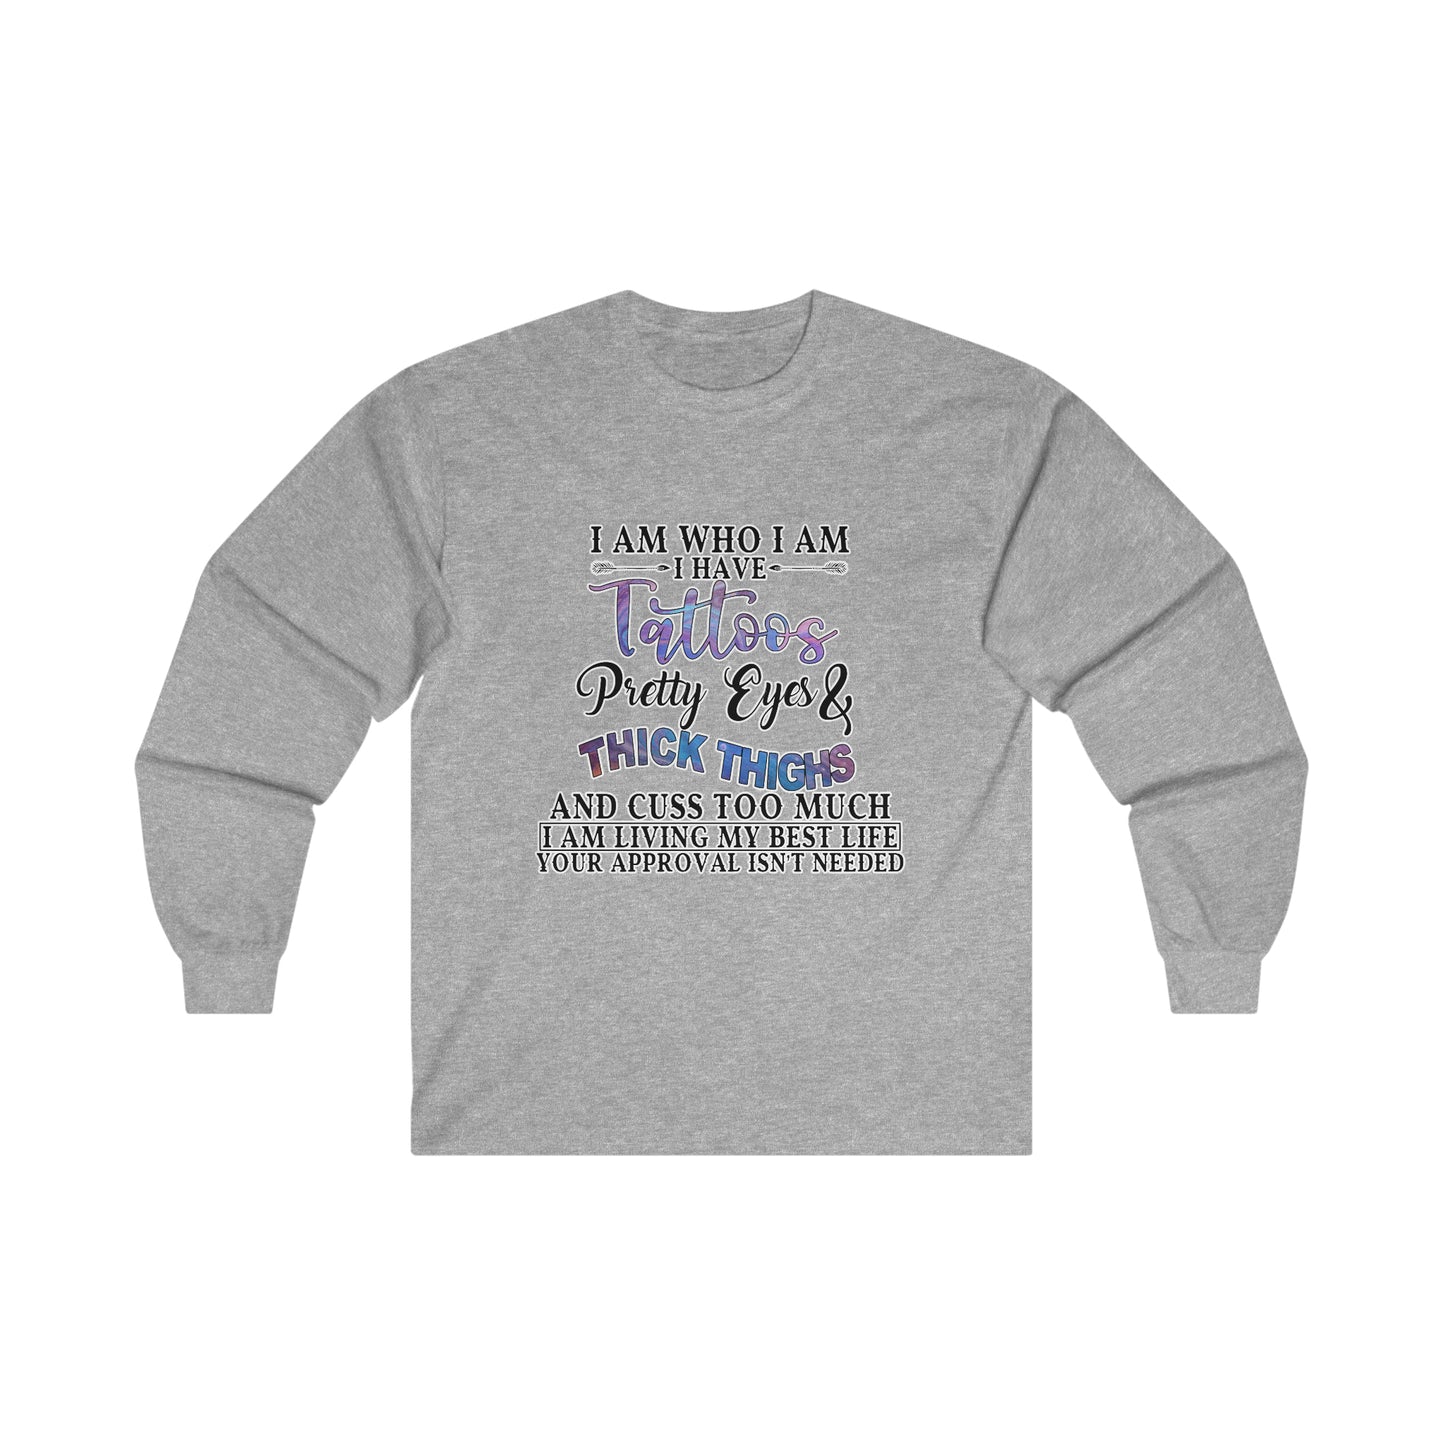 I Am Who I Am, Tattoos, Pretty Eyes, Thick Thighs: Ultra Cotton Long Sleeve Tee